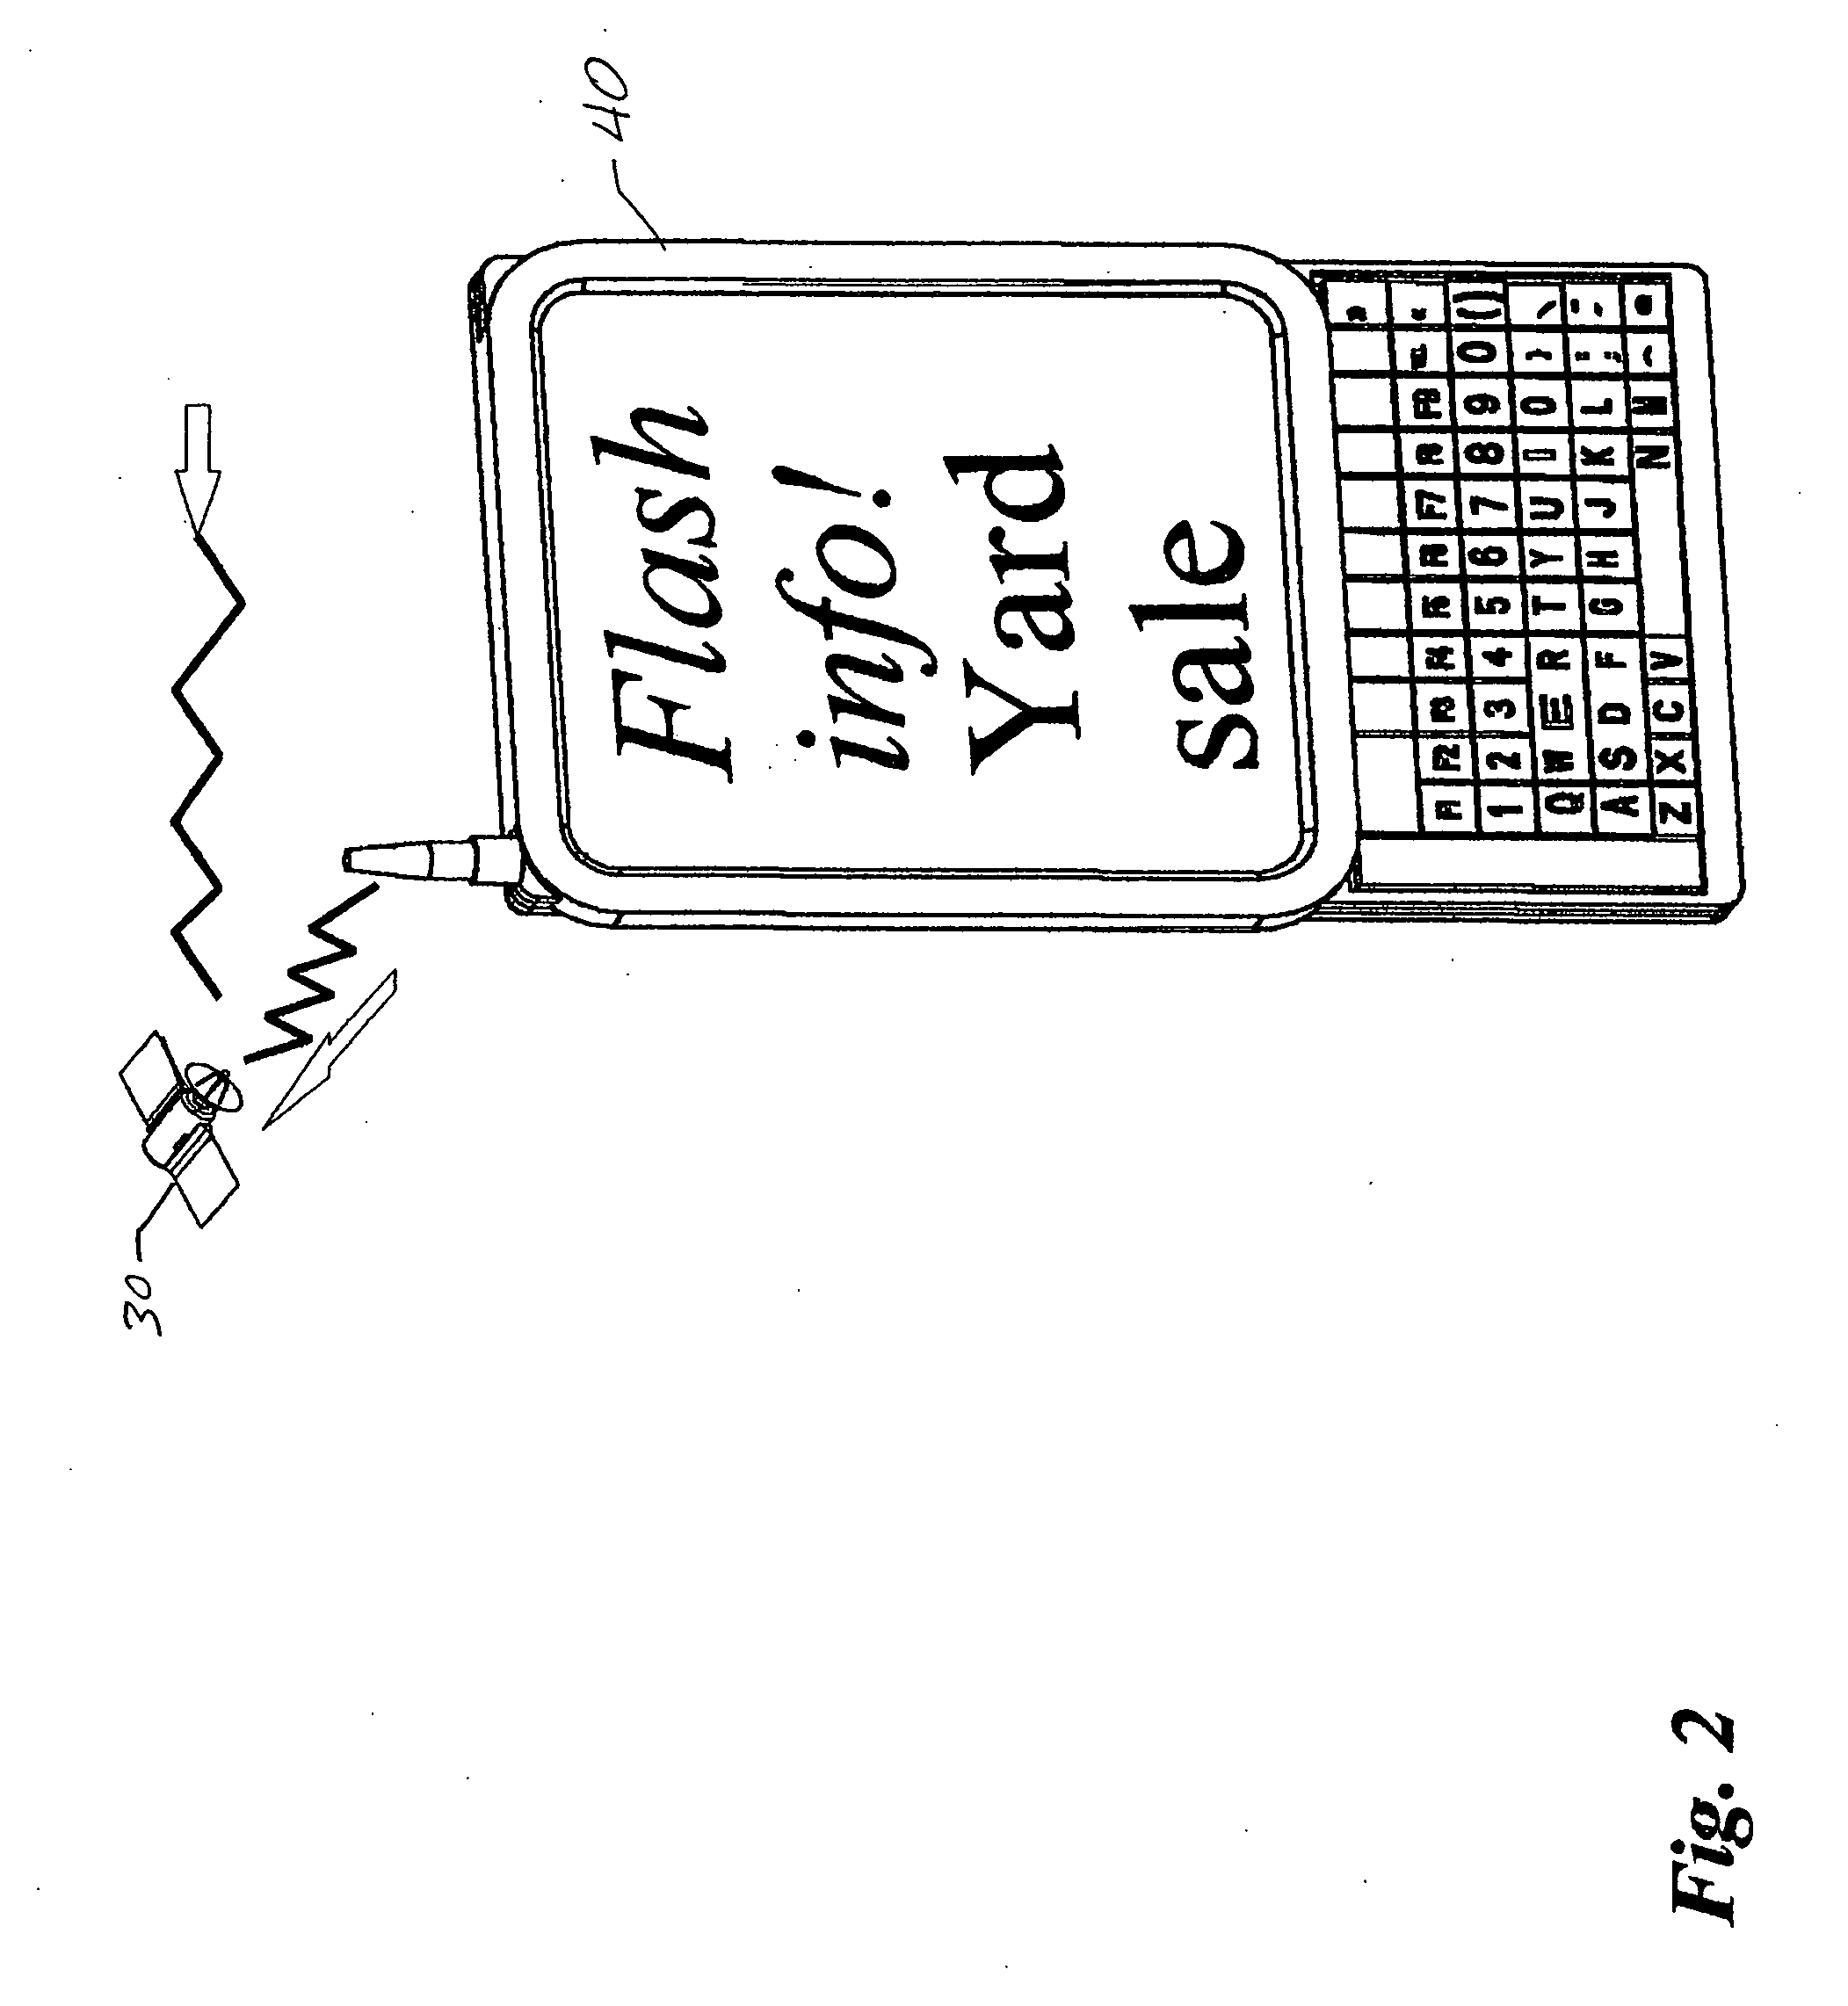 Distribution of location specific advertising information via wireless communication network